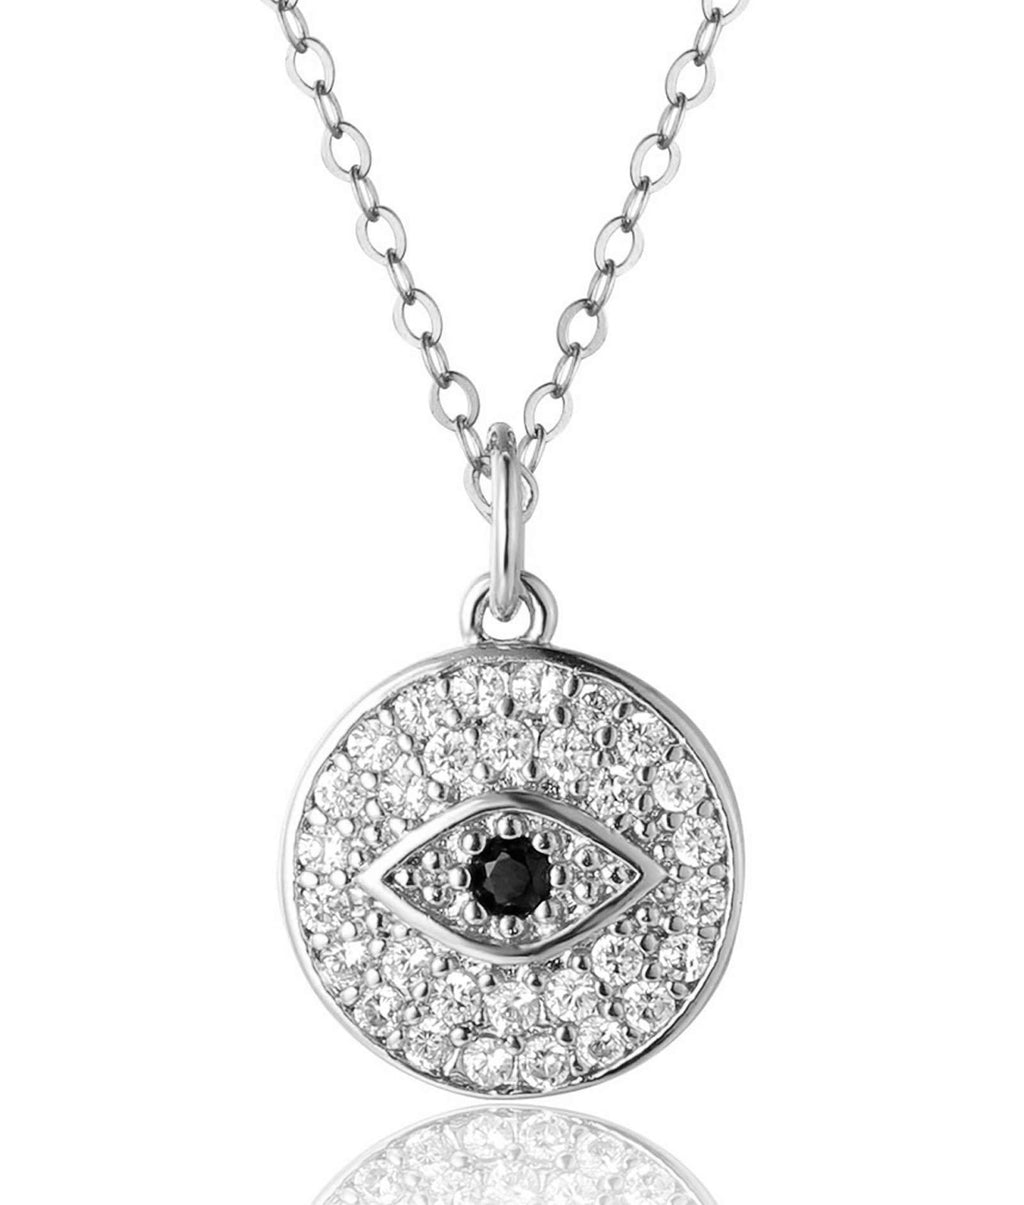 [Australia] - HALUKAKAH Evil Eye Necklace Bracelet Brooch Diamonds for Women,24k Real Yellow Gold/Platinum Plated Blue Eye Coin Pendant Handmade Protection Mal de Ojo Jewelry Sweater Long Chain with Free Giftbox Platinum Plated Coin Necklace Only 